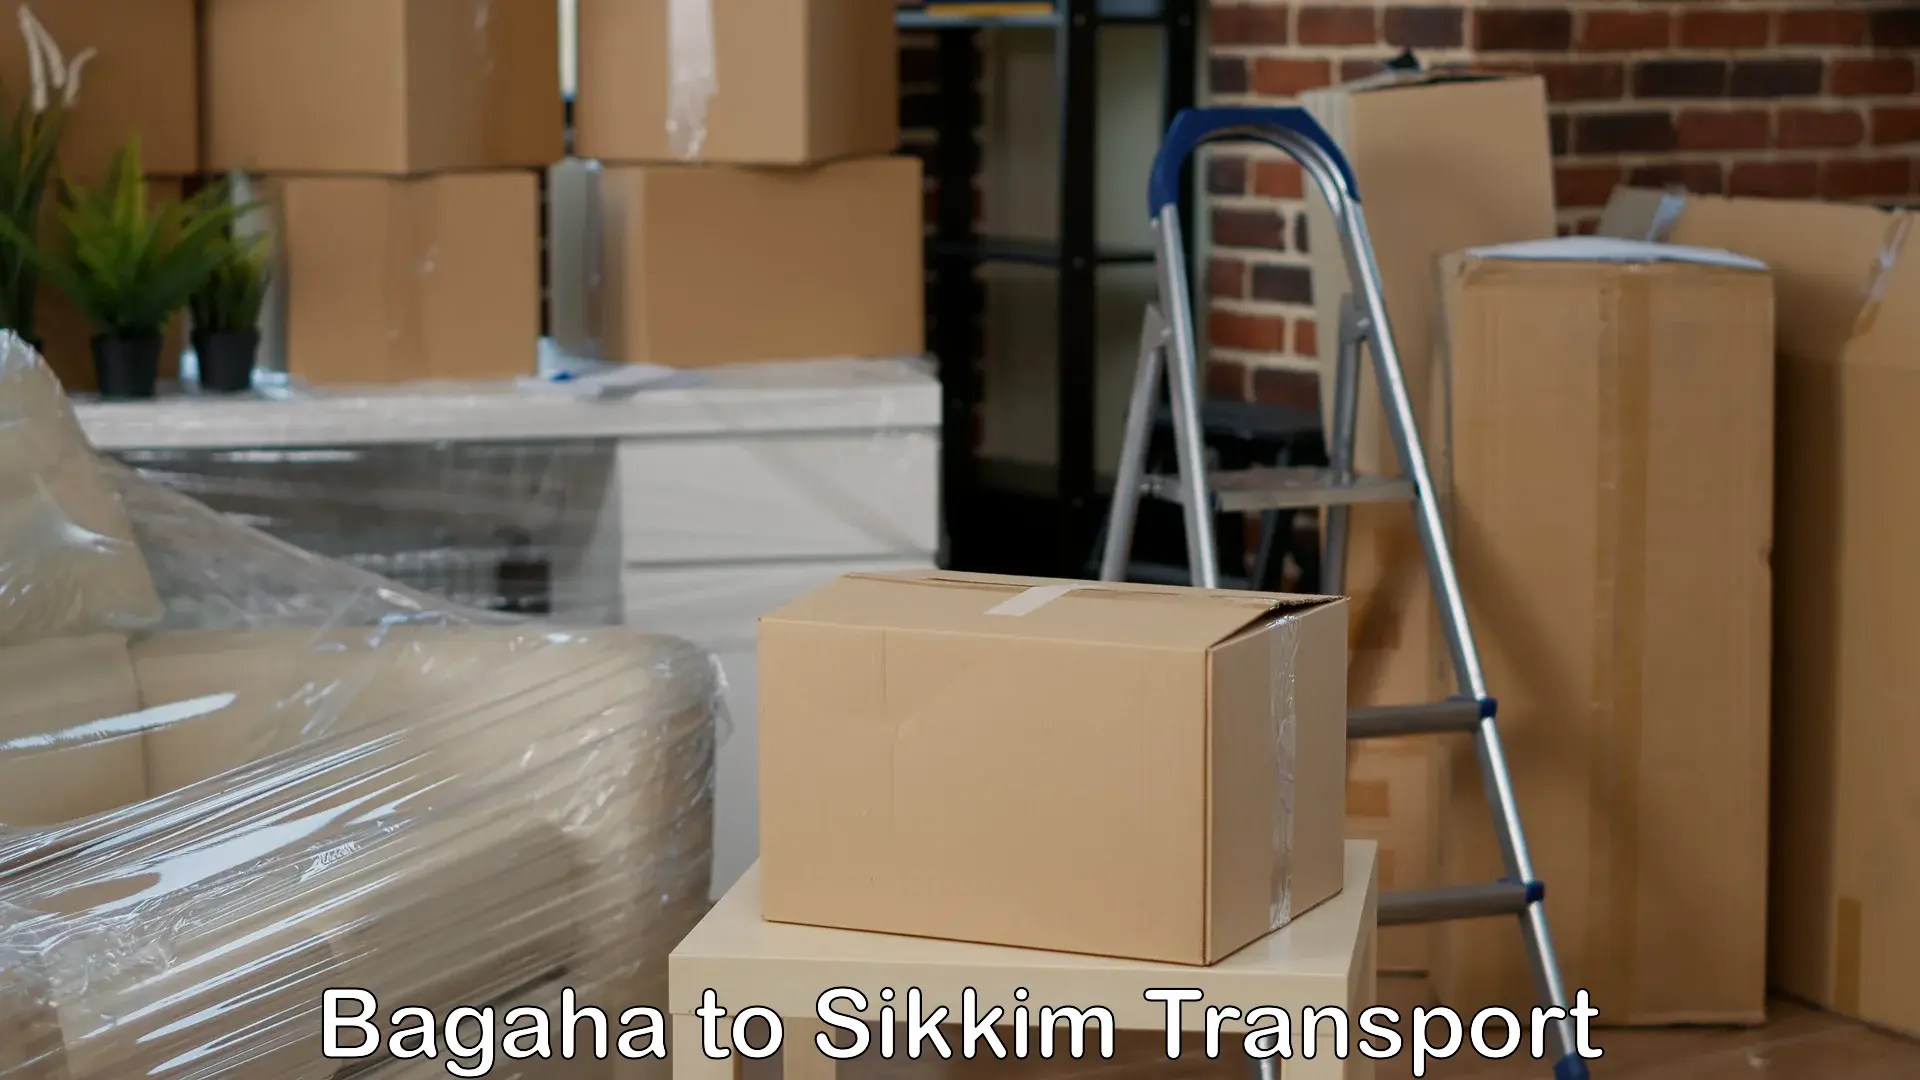 Truck transport companies in India in Bagaha to Geyzing